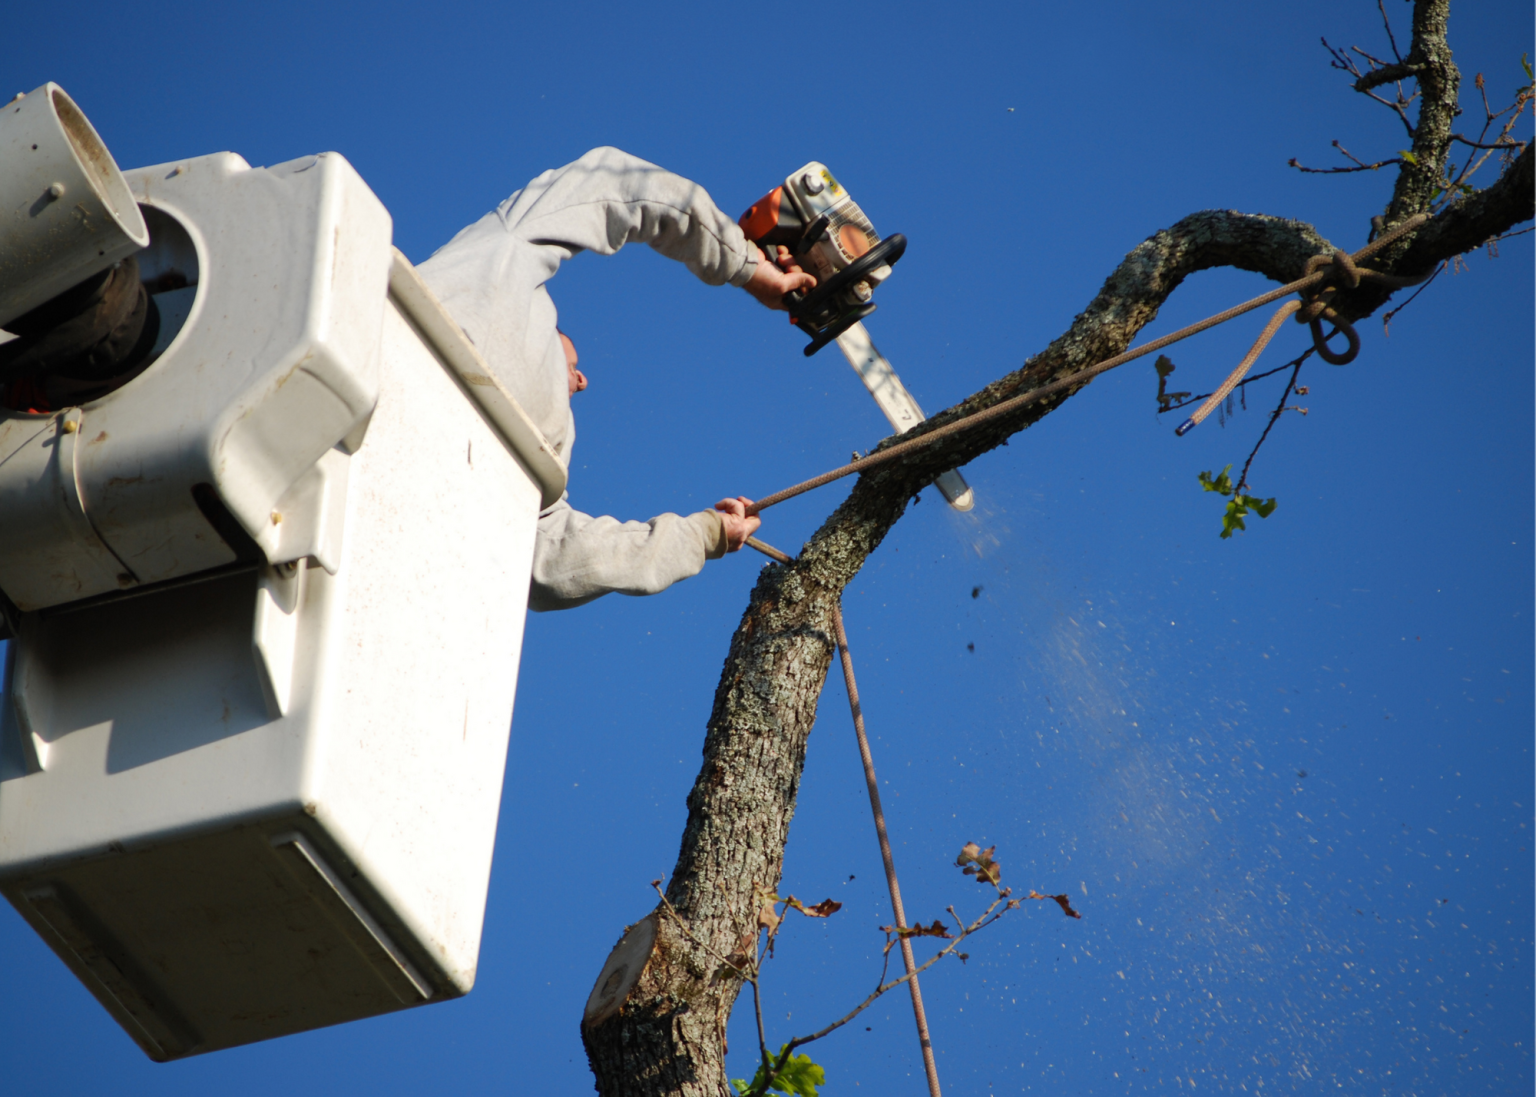 Borough Tree Removal Experts